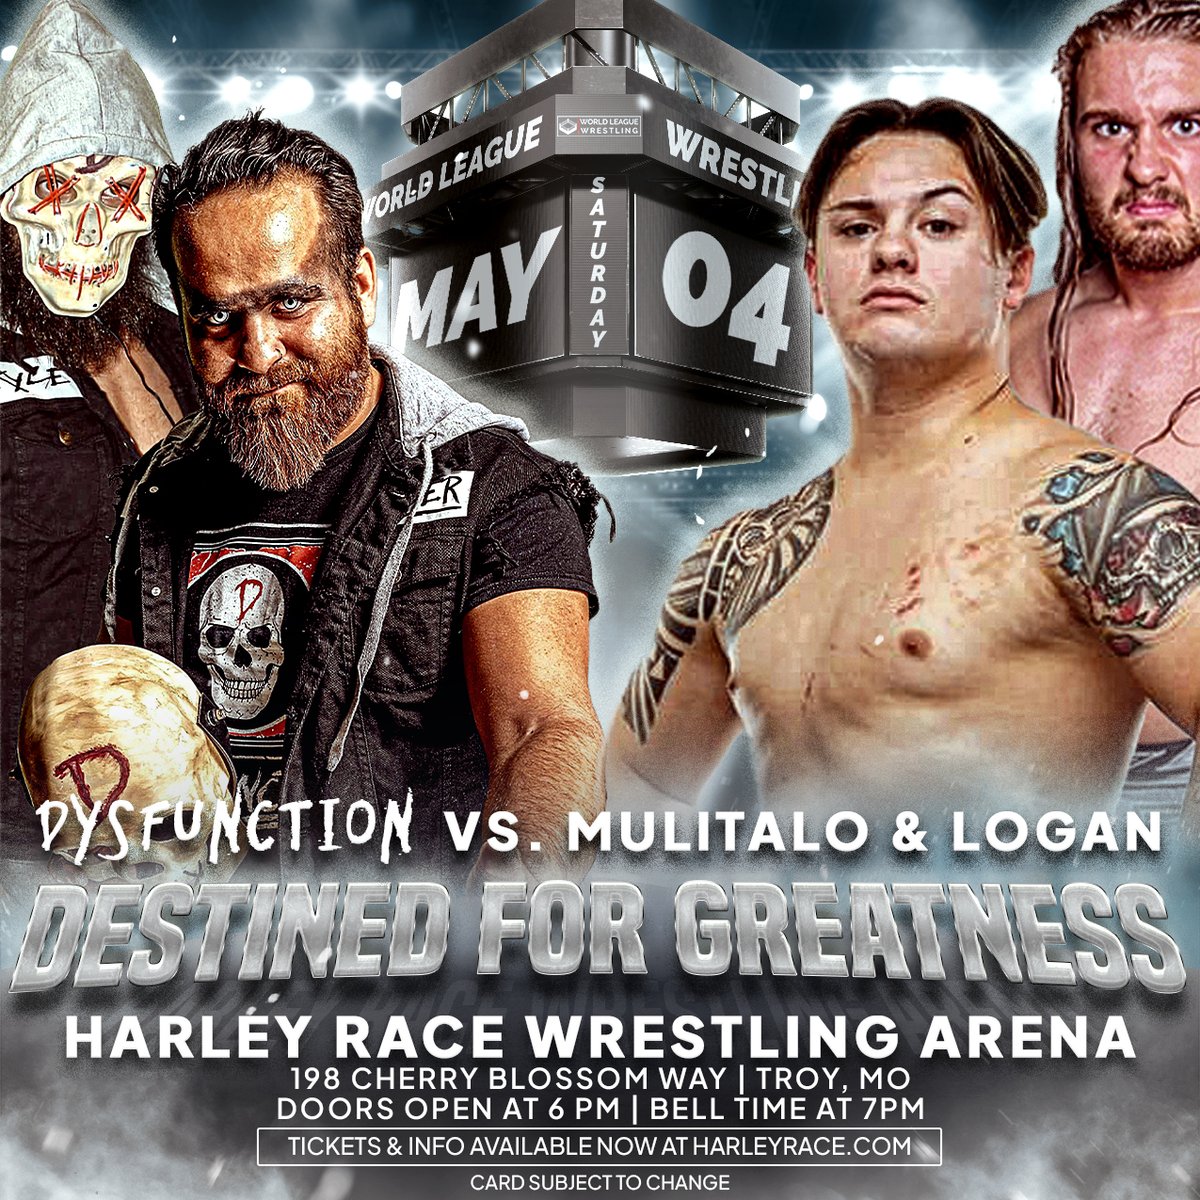 🚨 TONIGHT: Destined for Greatness - it's gonna be off the charts! 💥🤼‍♂️ Don't miss the action-packed event at the Harley Race Wrestling Arena in Troy! Limited tickets available - grab yours now at harleyrace.com 🎟️ #WLW #Wrestling #LiveEvent